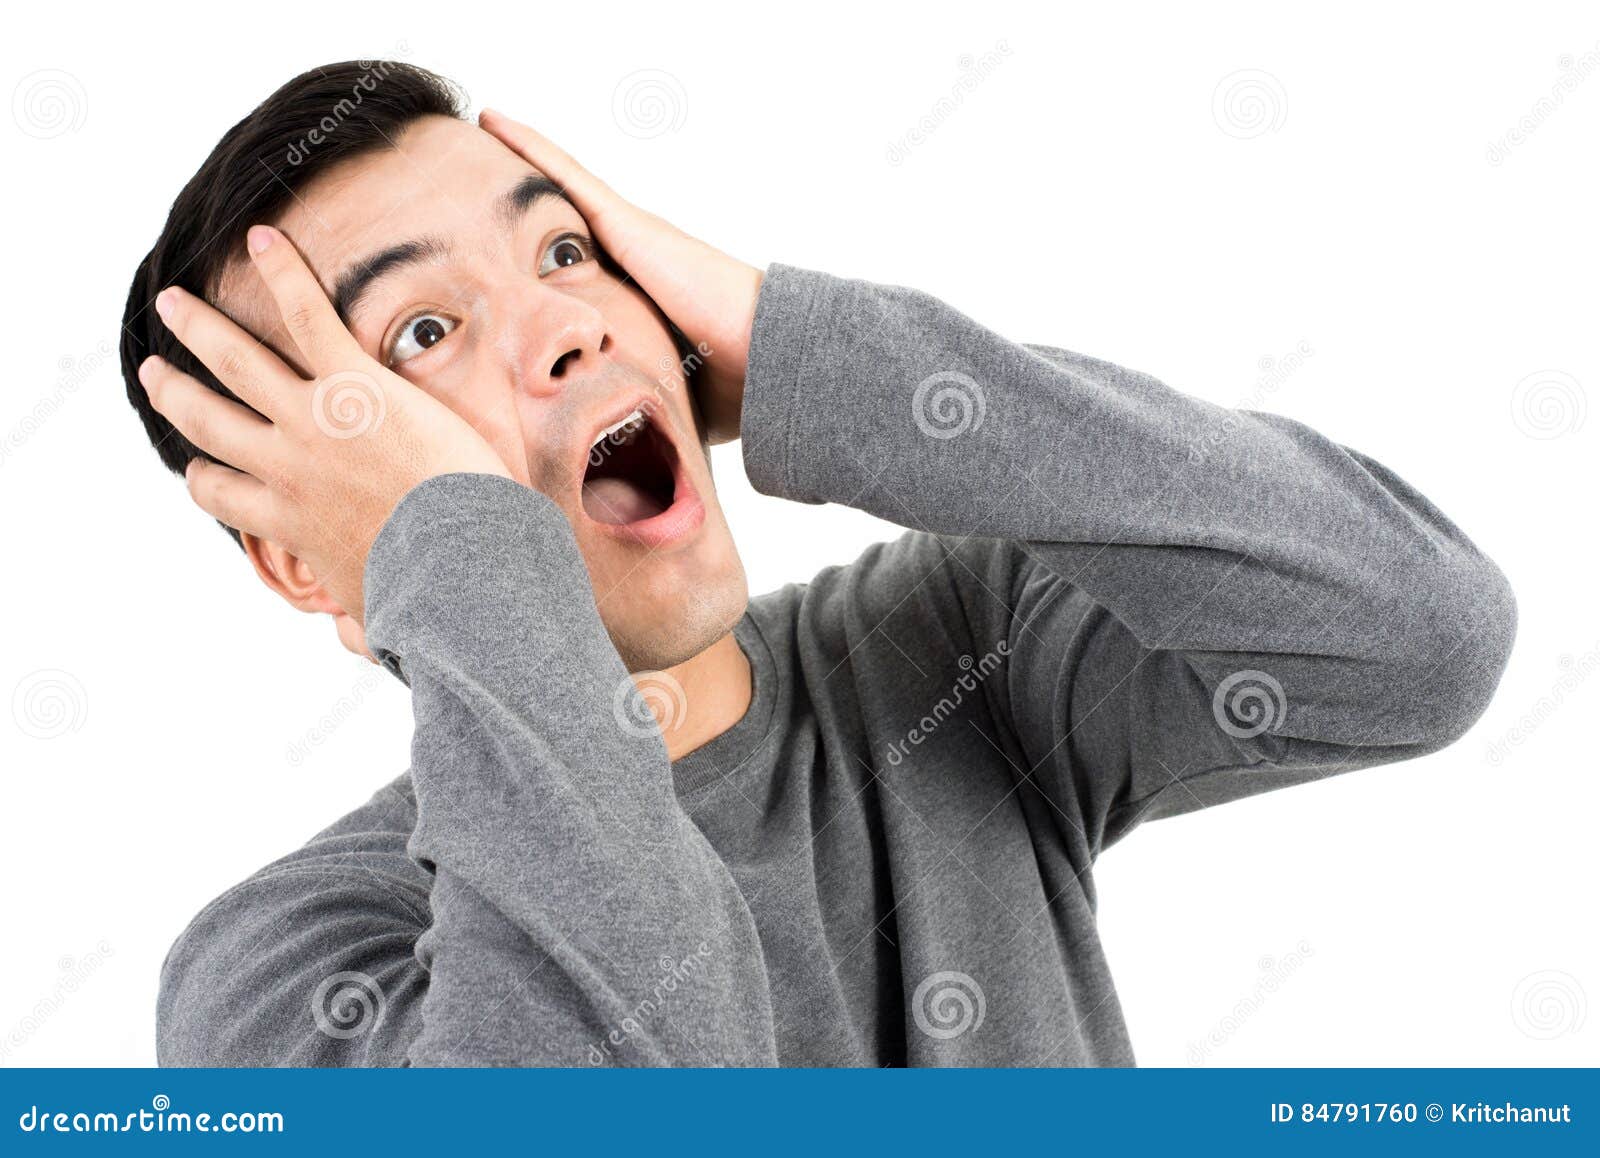 young man expressing shocked face with hands on head